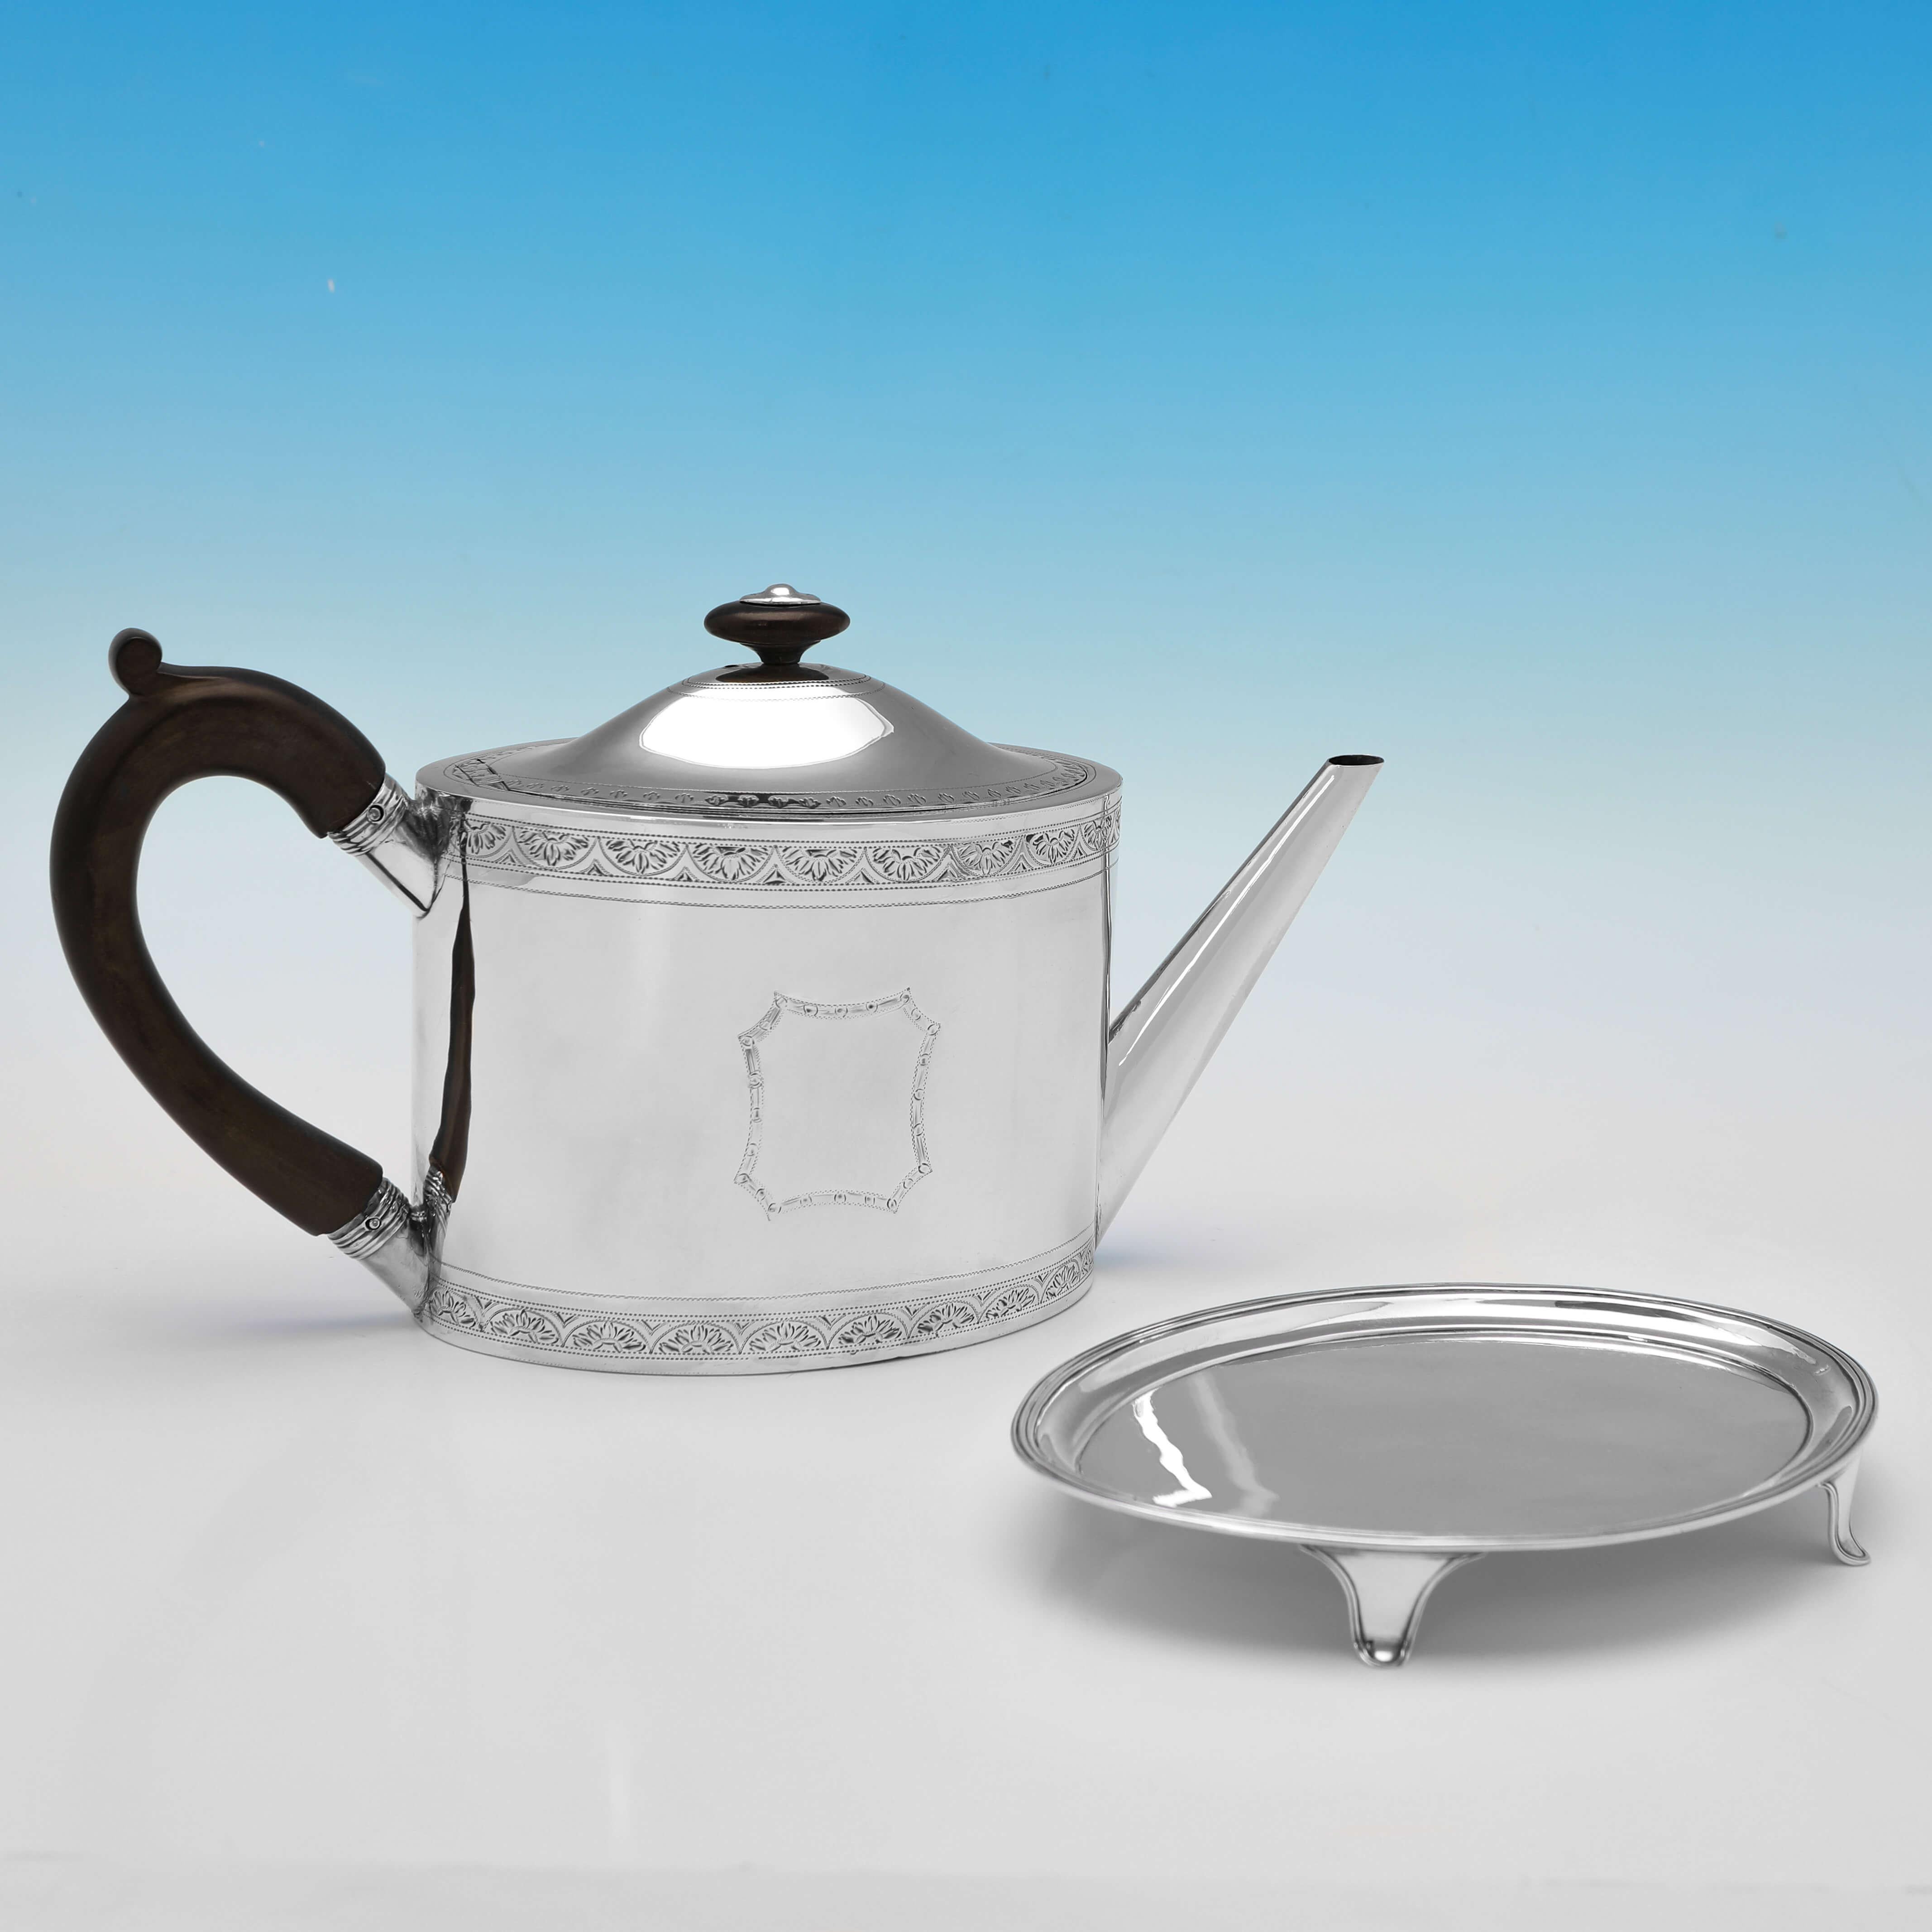 Hallmarked in London in 1793 by Henry Chawner, this handsome, George III, Antique Sterling Silver Teapot & Stand, is oval in shape, and features bright cut engraved decoration to the teapot, and a wooden handle and finial. 

The teapot on the stand